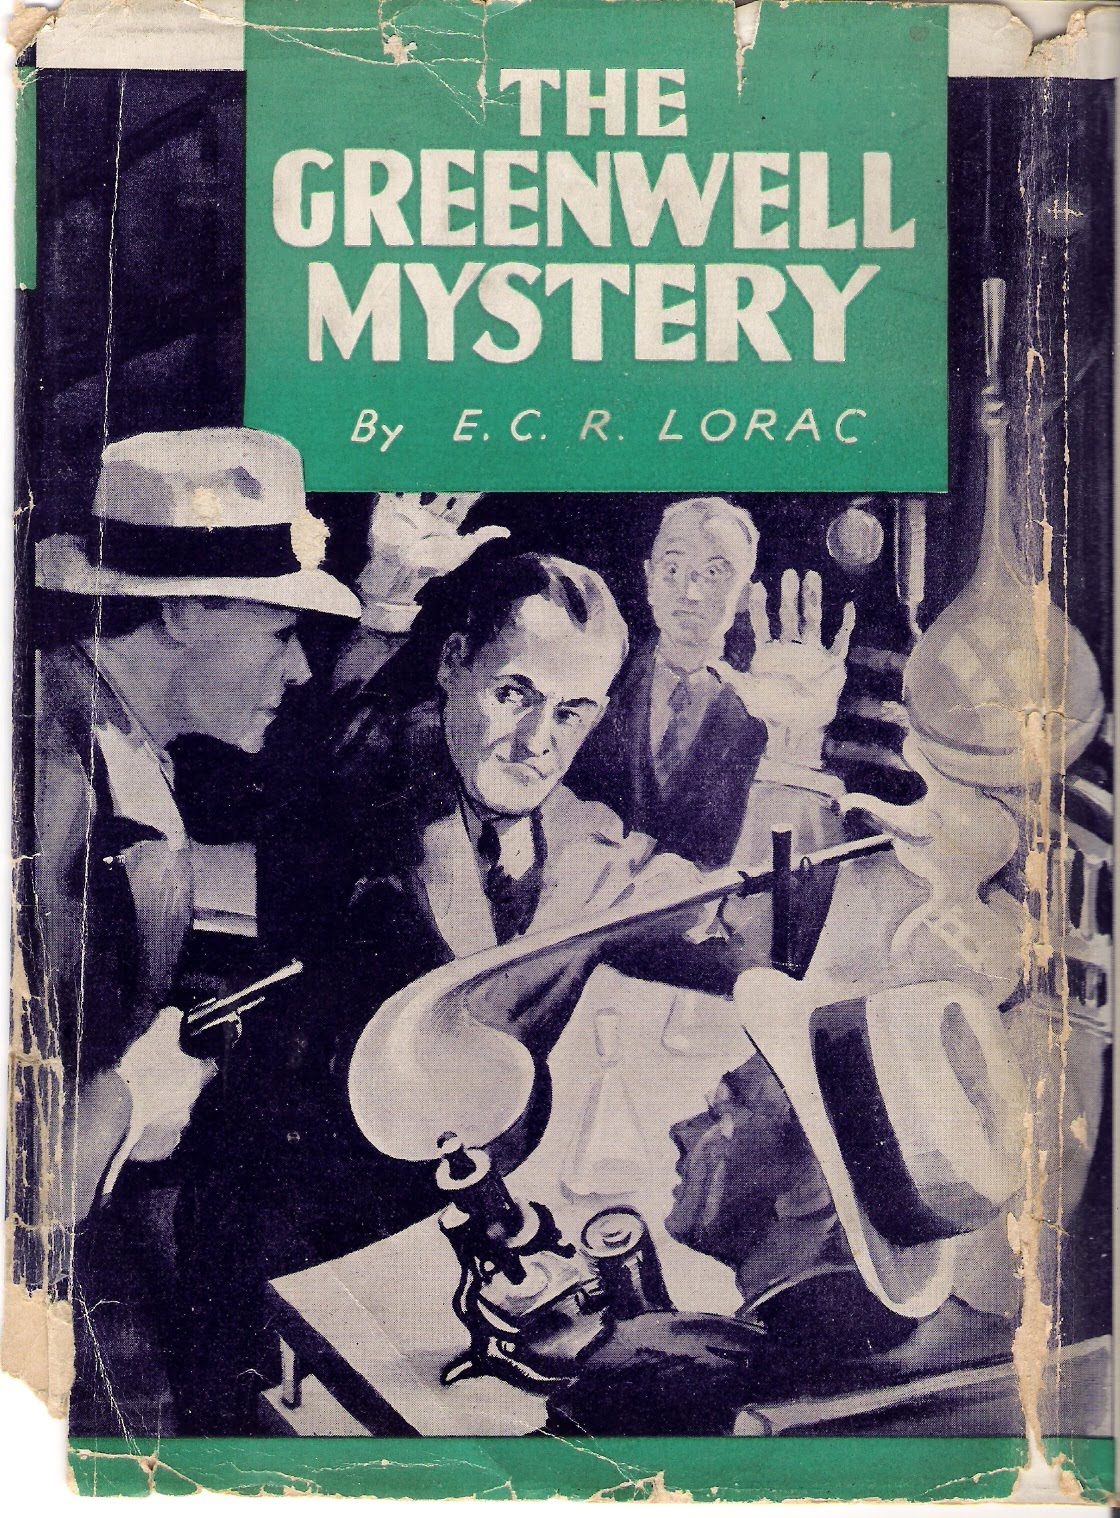 Where can you find a list of British mystery writers?